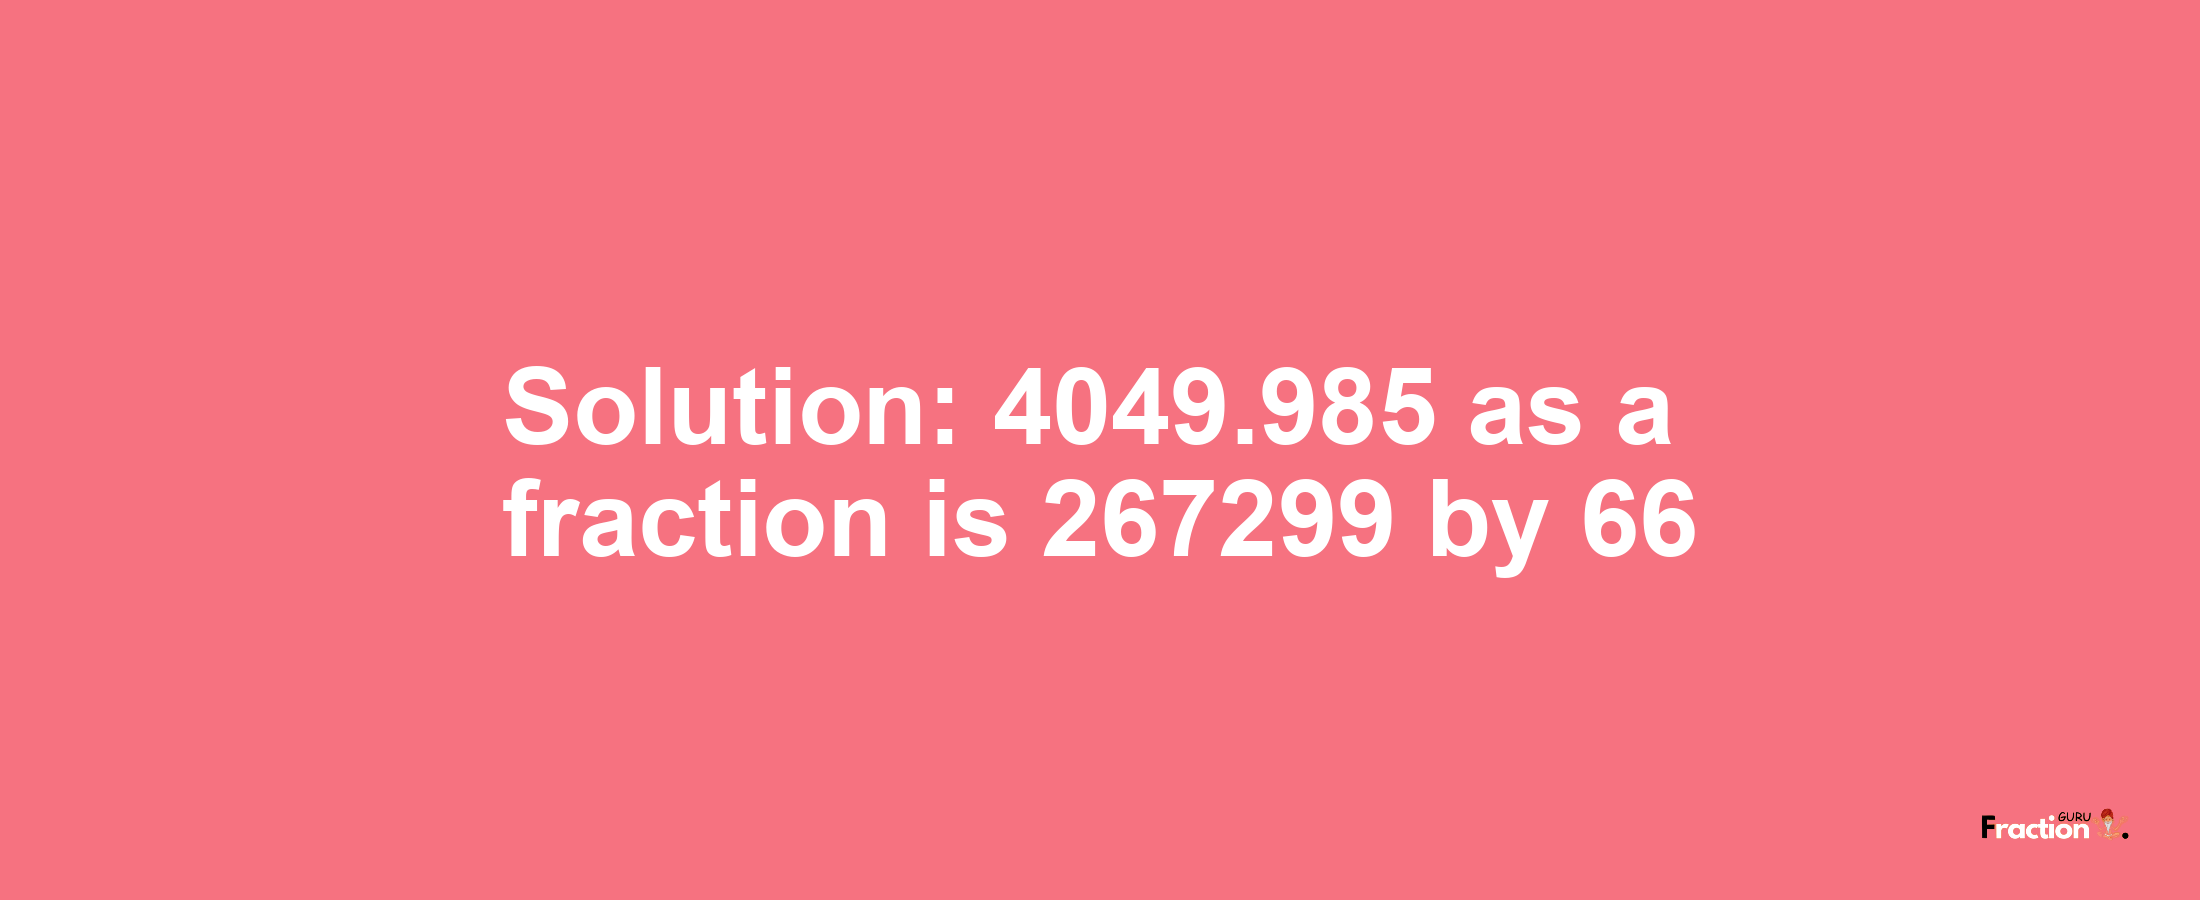 Solution:4049.985 as a fraction is 267299/66